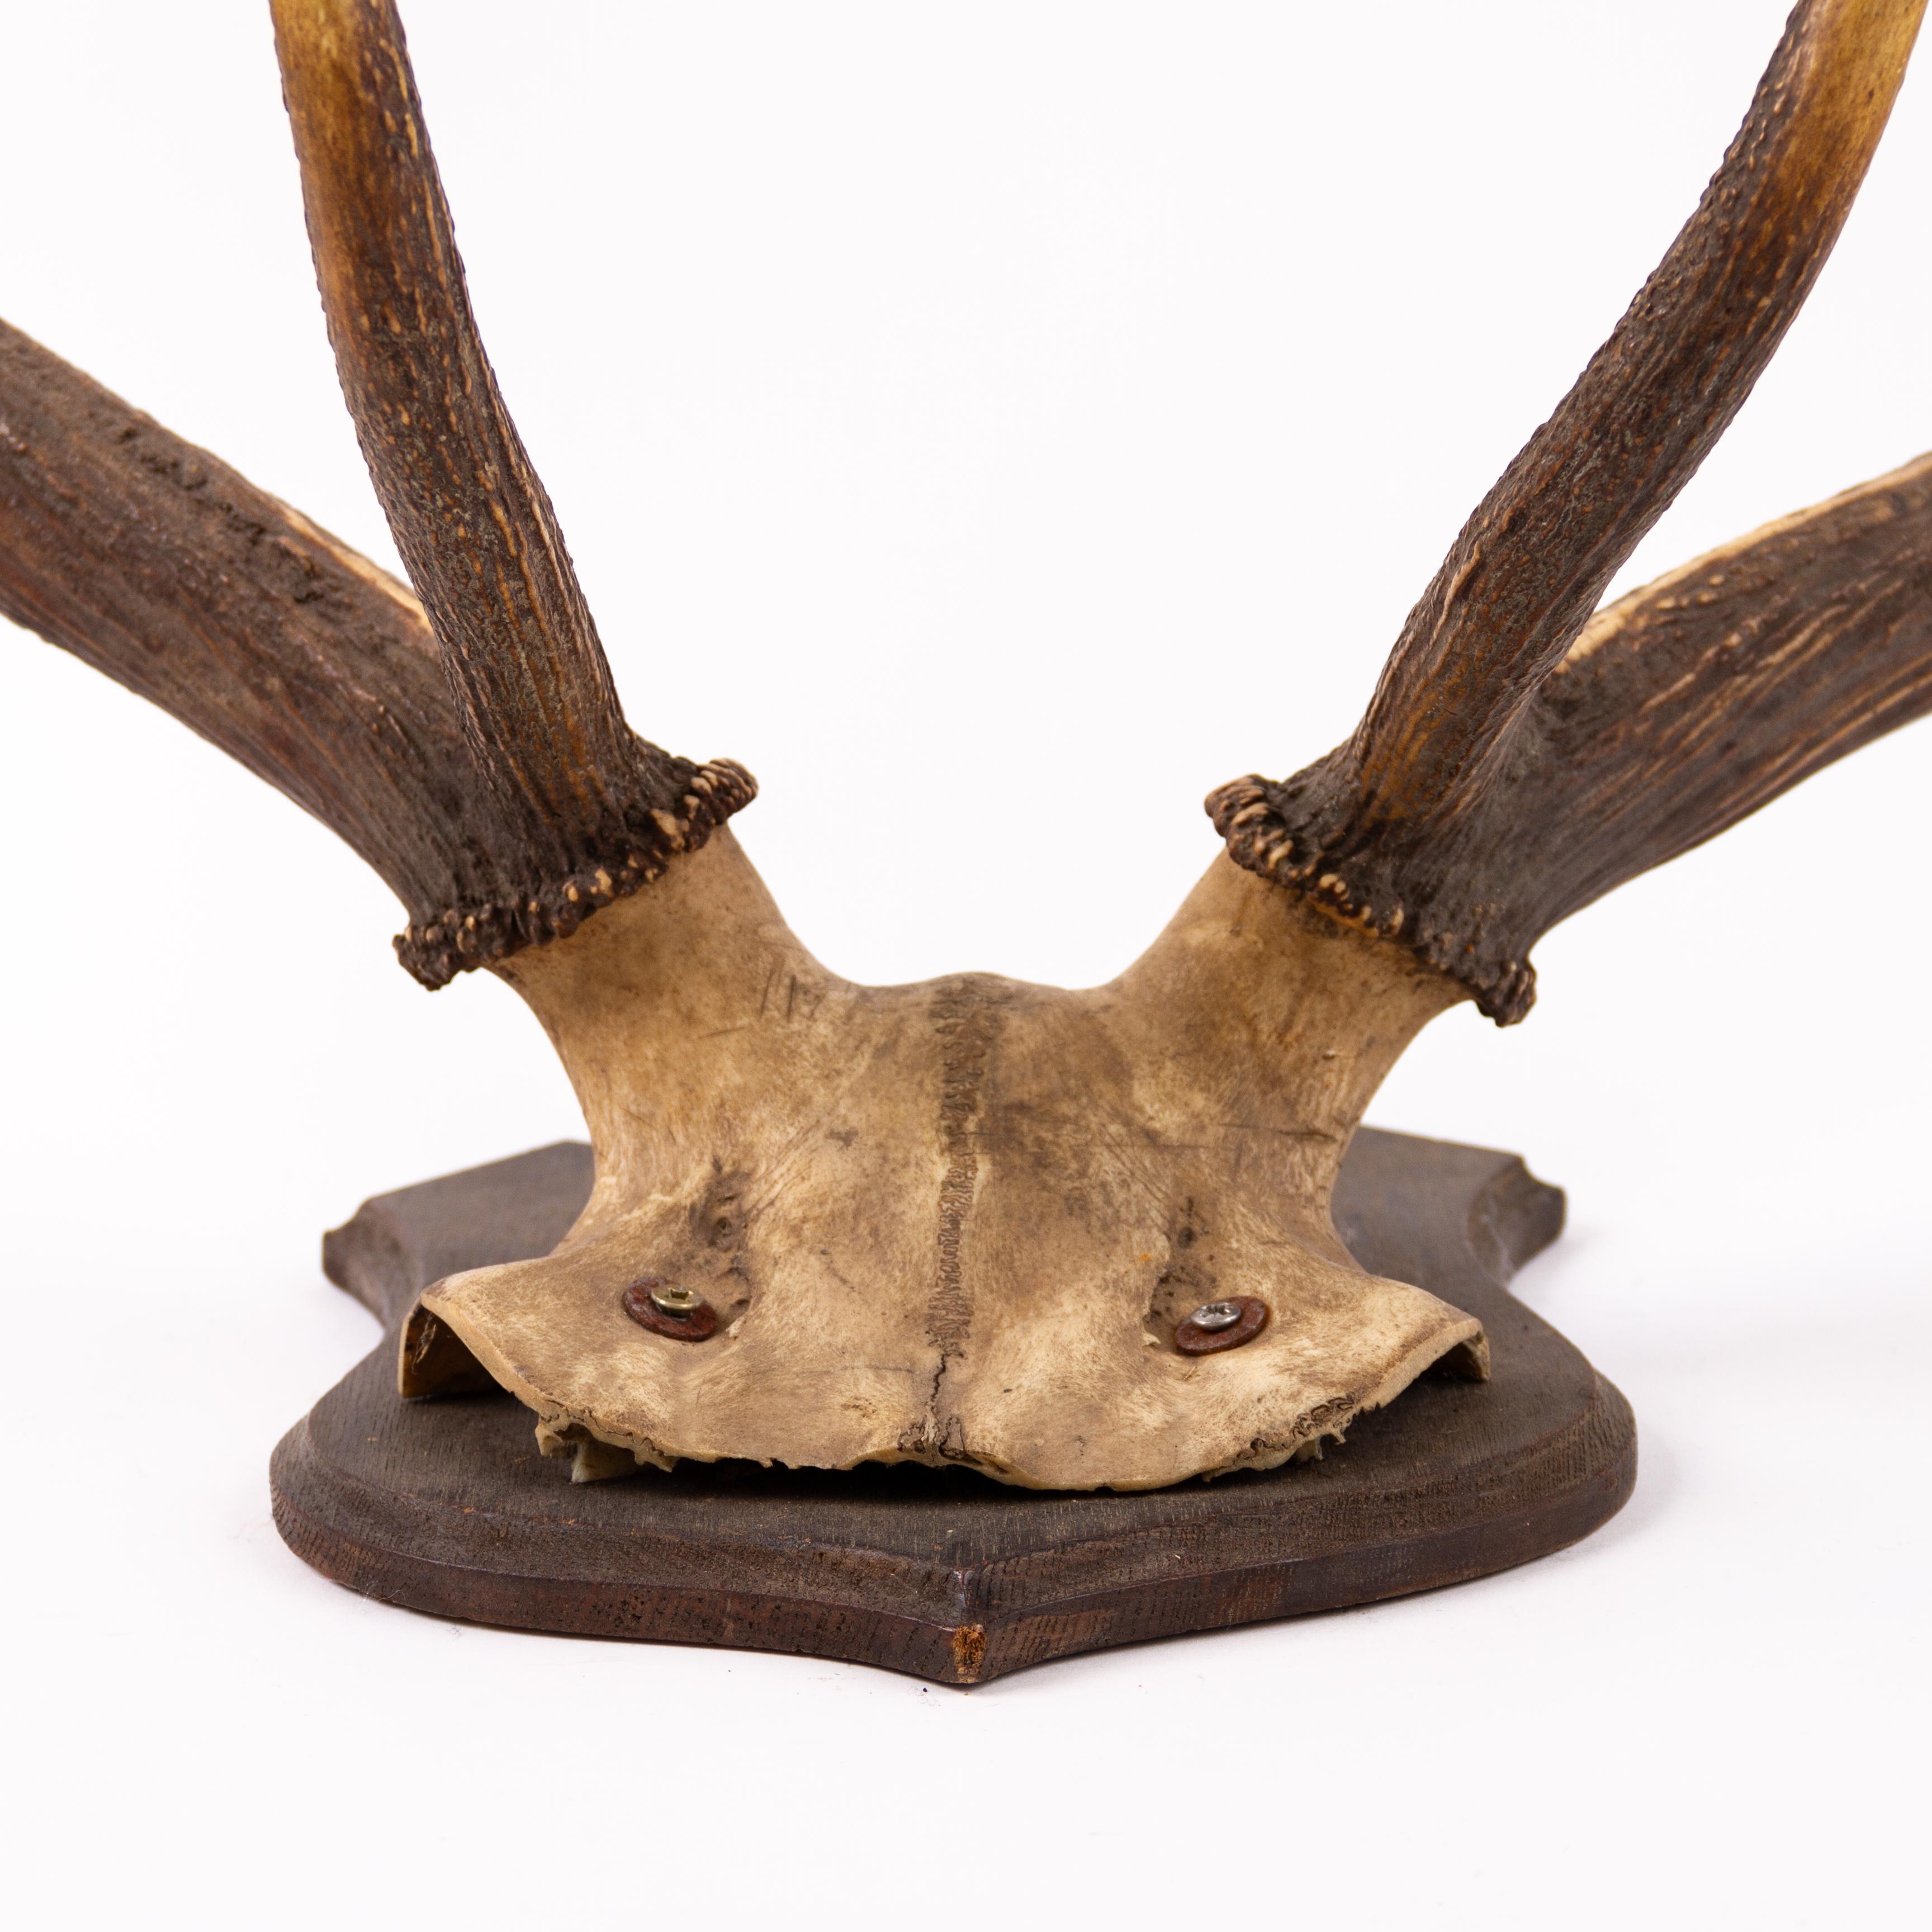 Large Set of Antique Wall Mount Hunting Stag Antlers Early 20thC

Good condition
Free international shipping.